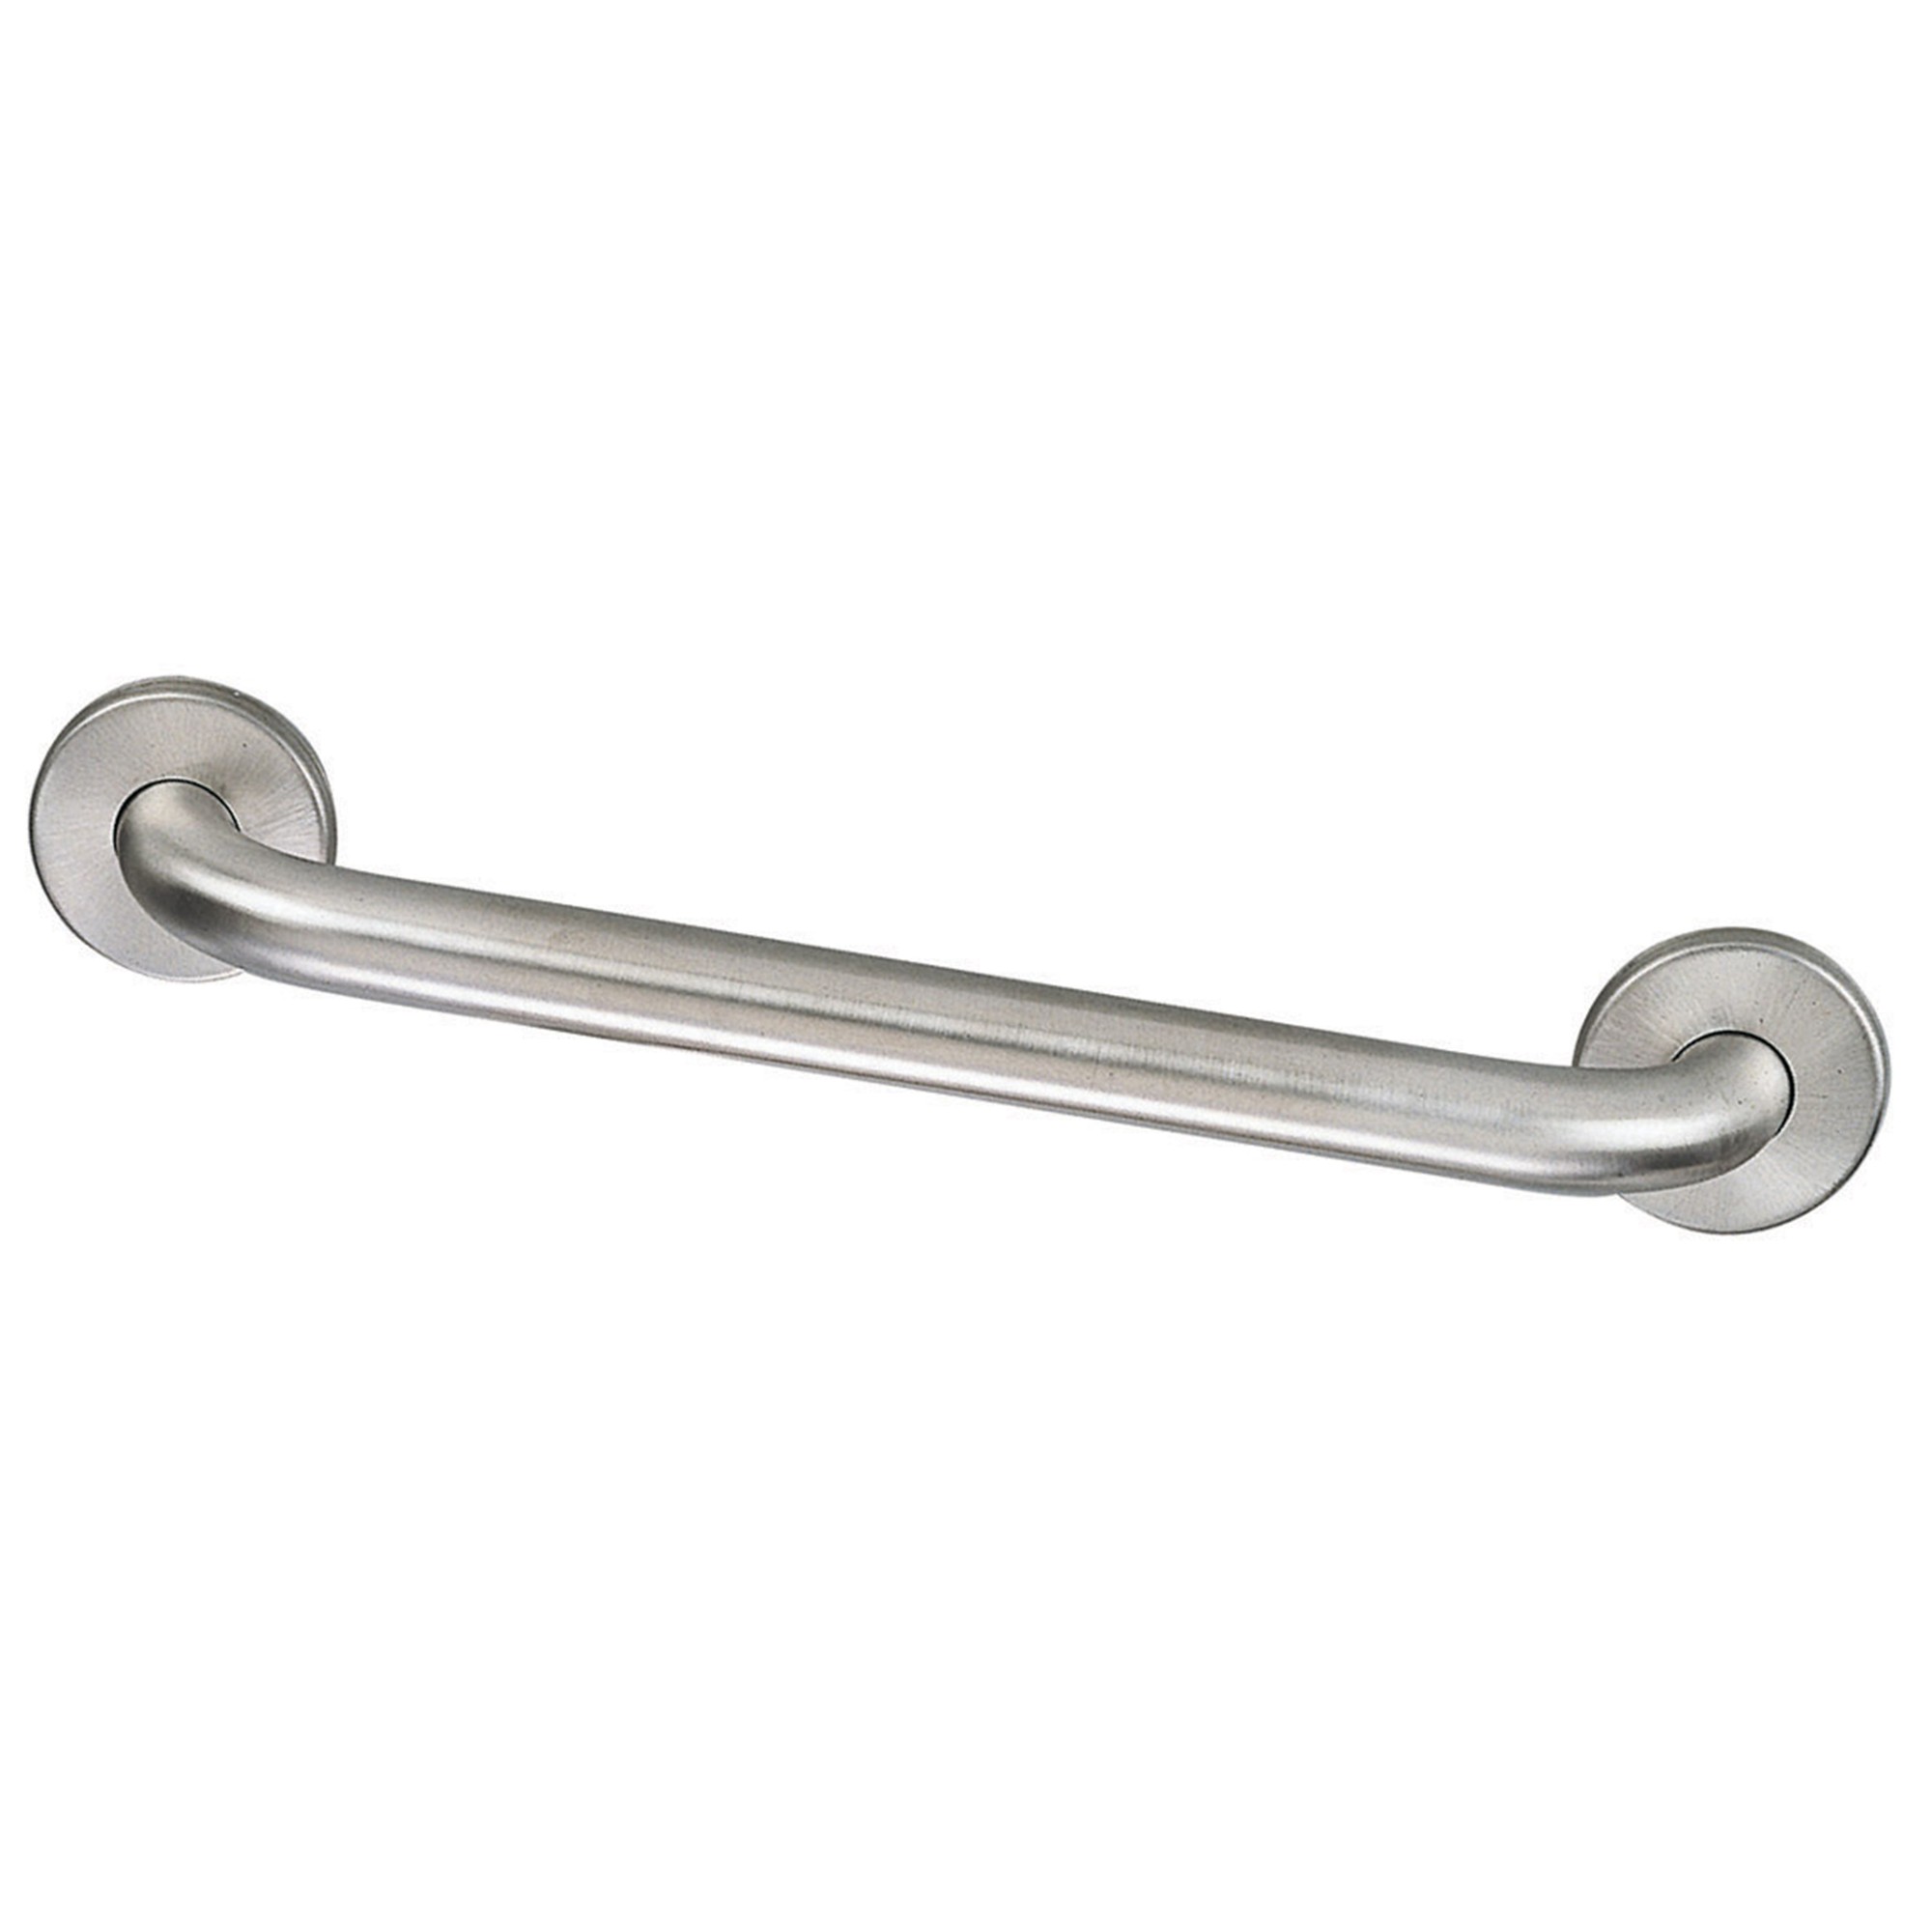 Commercial Safety Grab Bar, 24-Inch by 1.5-Inch, Satin Stainless Steel